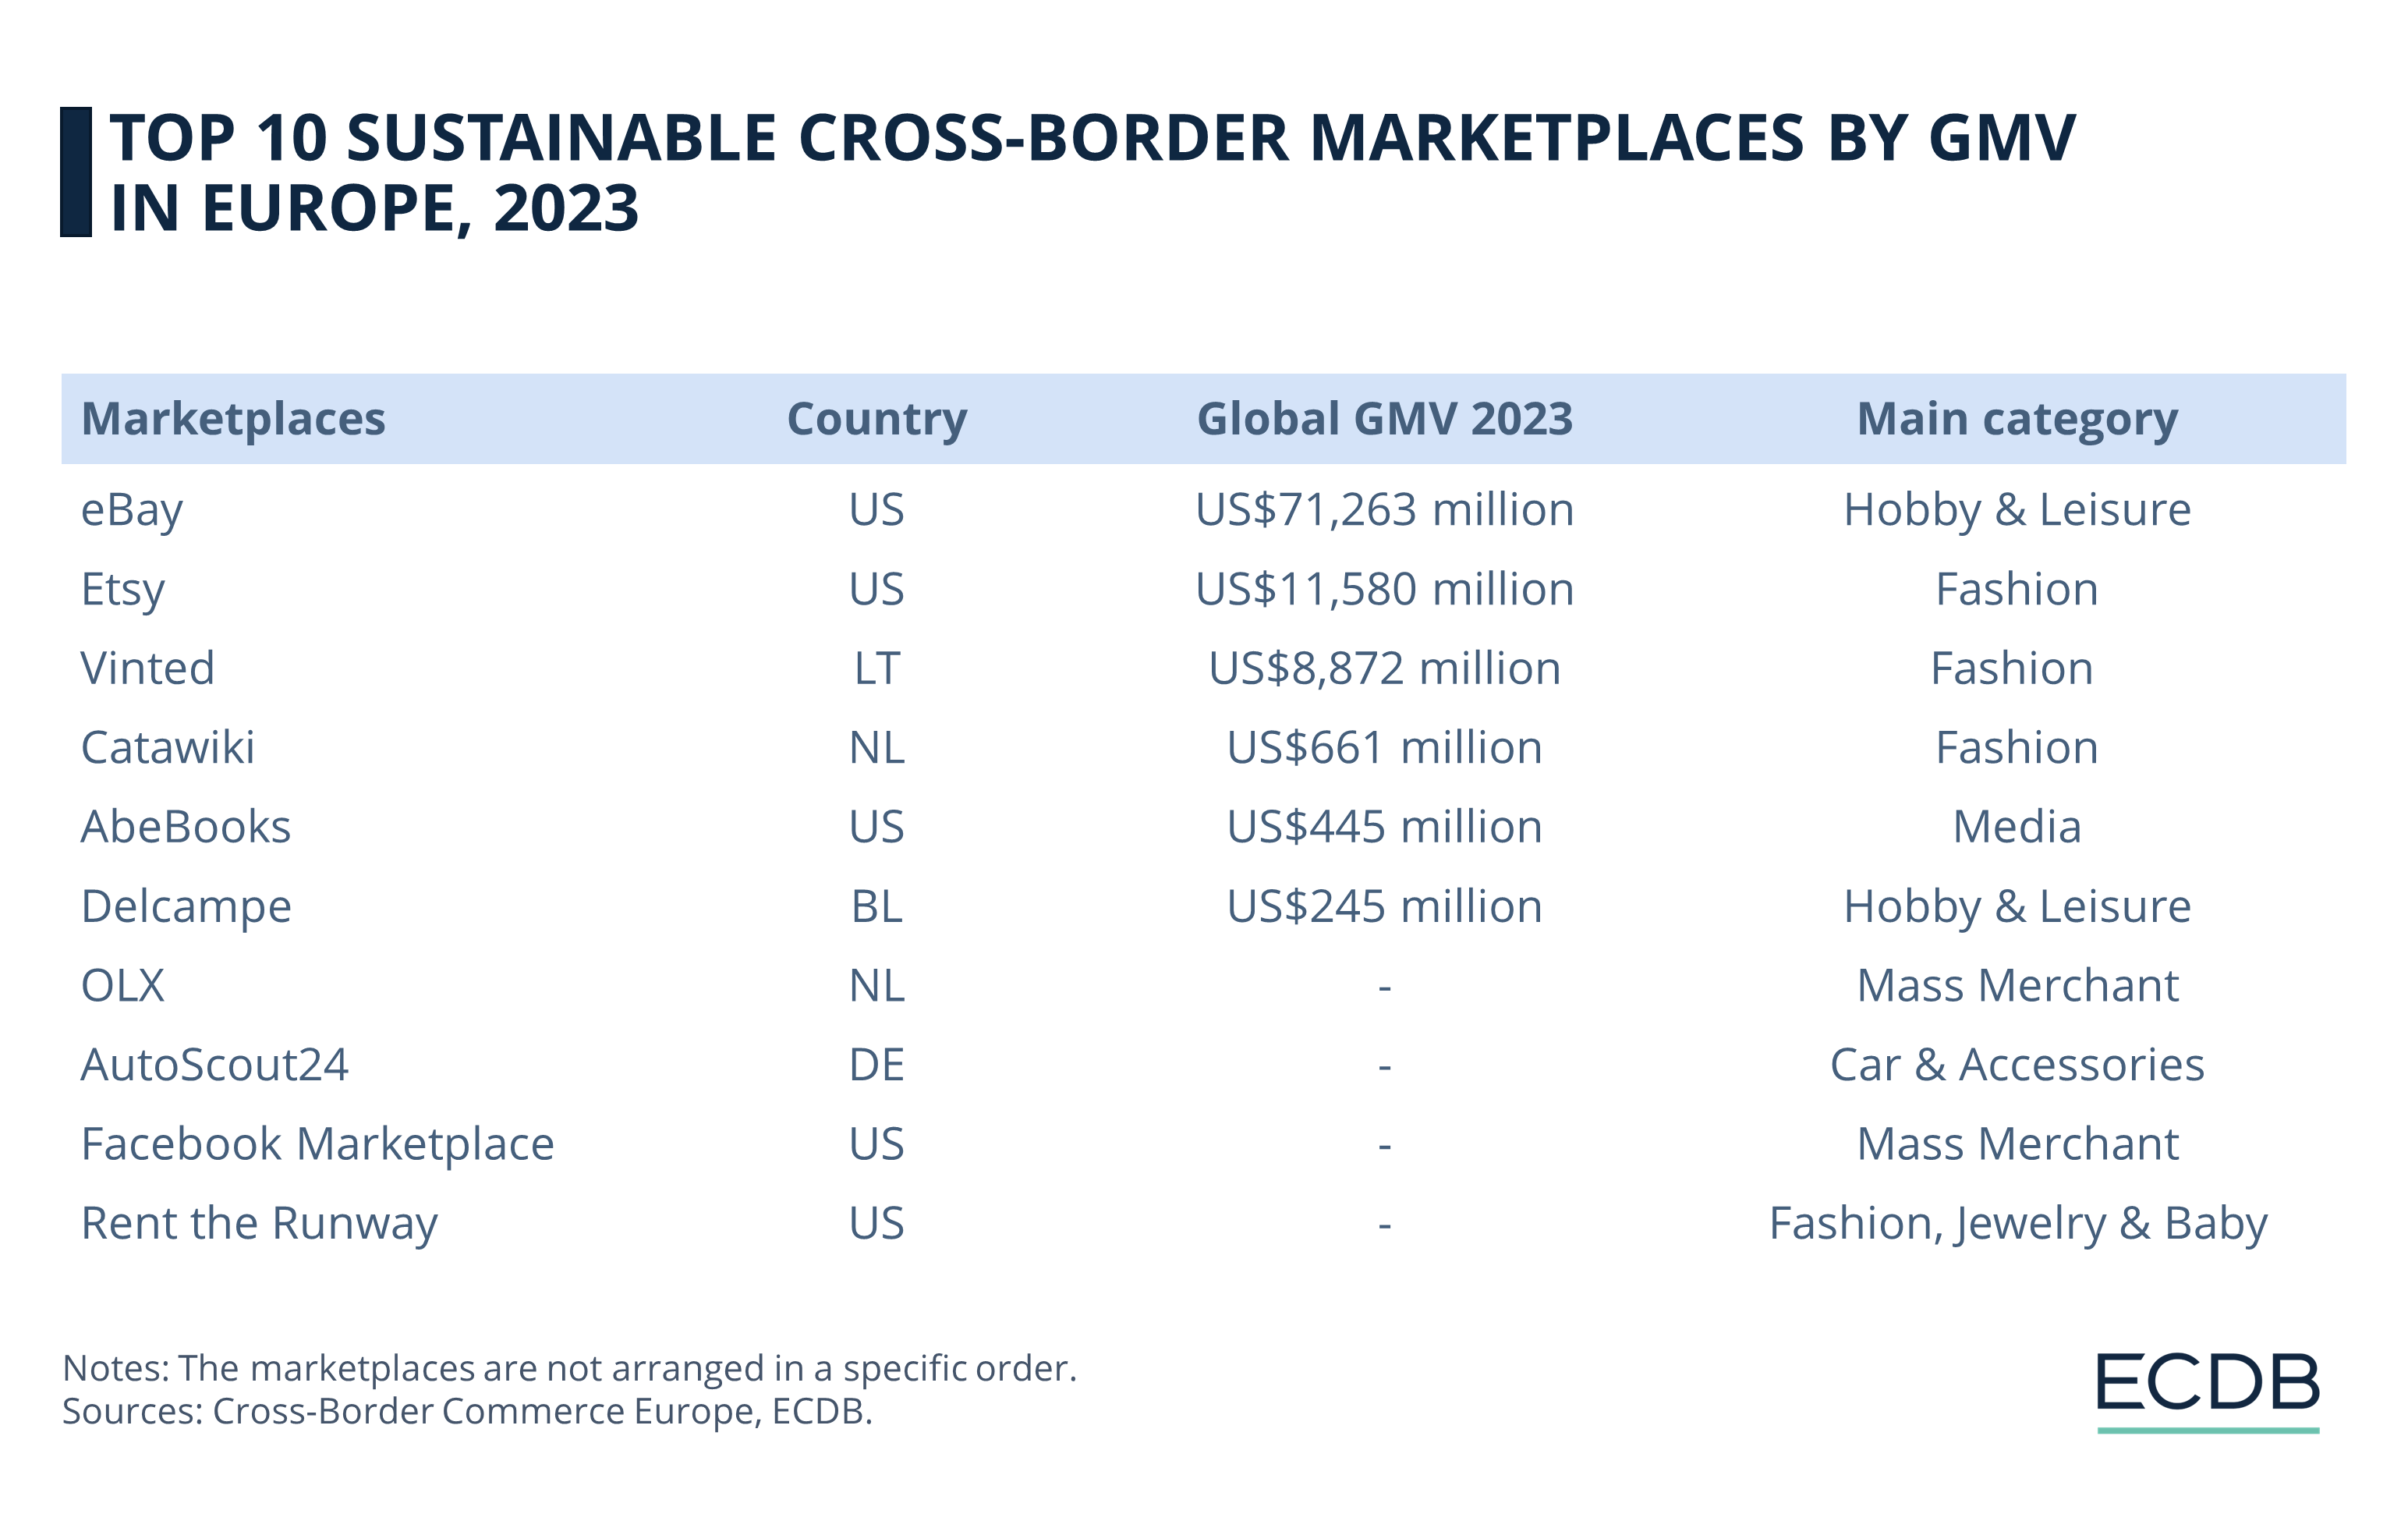 Top 10 Sustainable Cross-Border Marketplaces by GMV in Europe. 2023